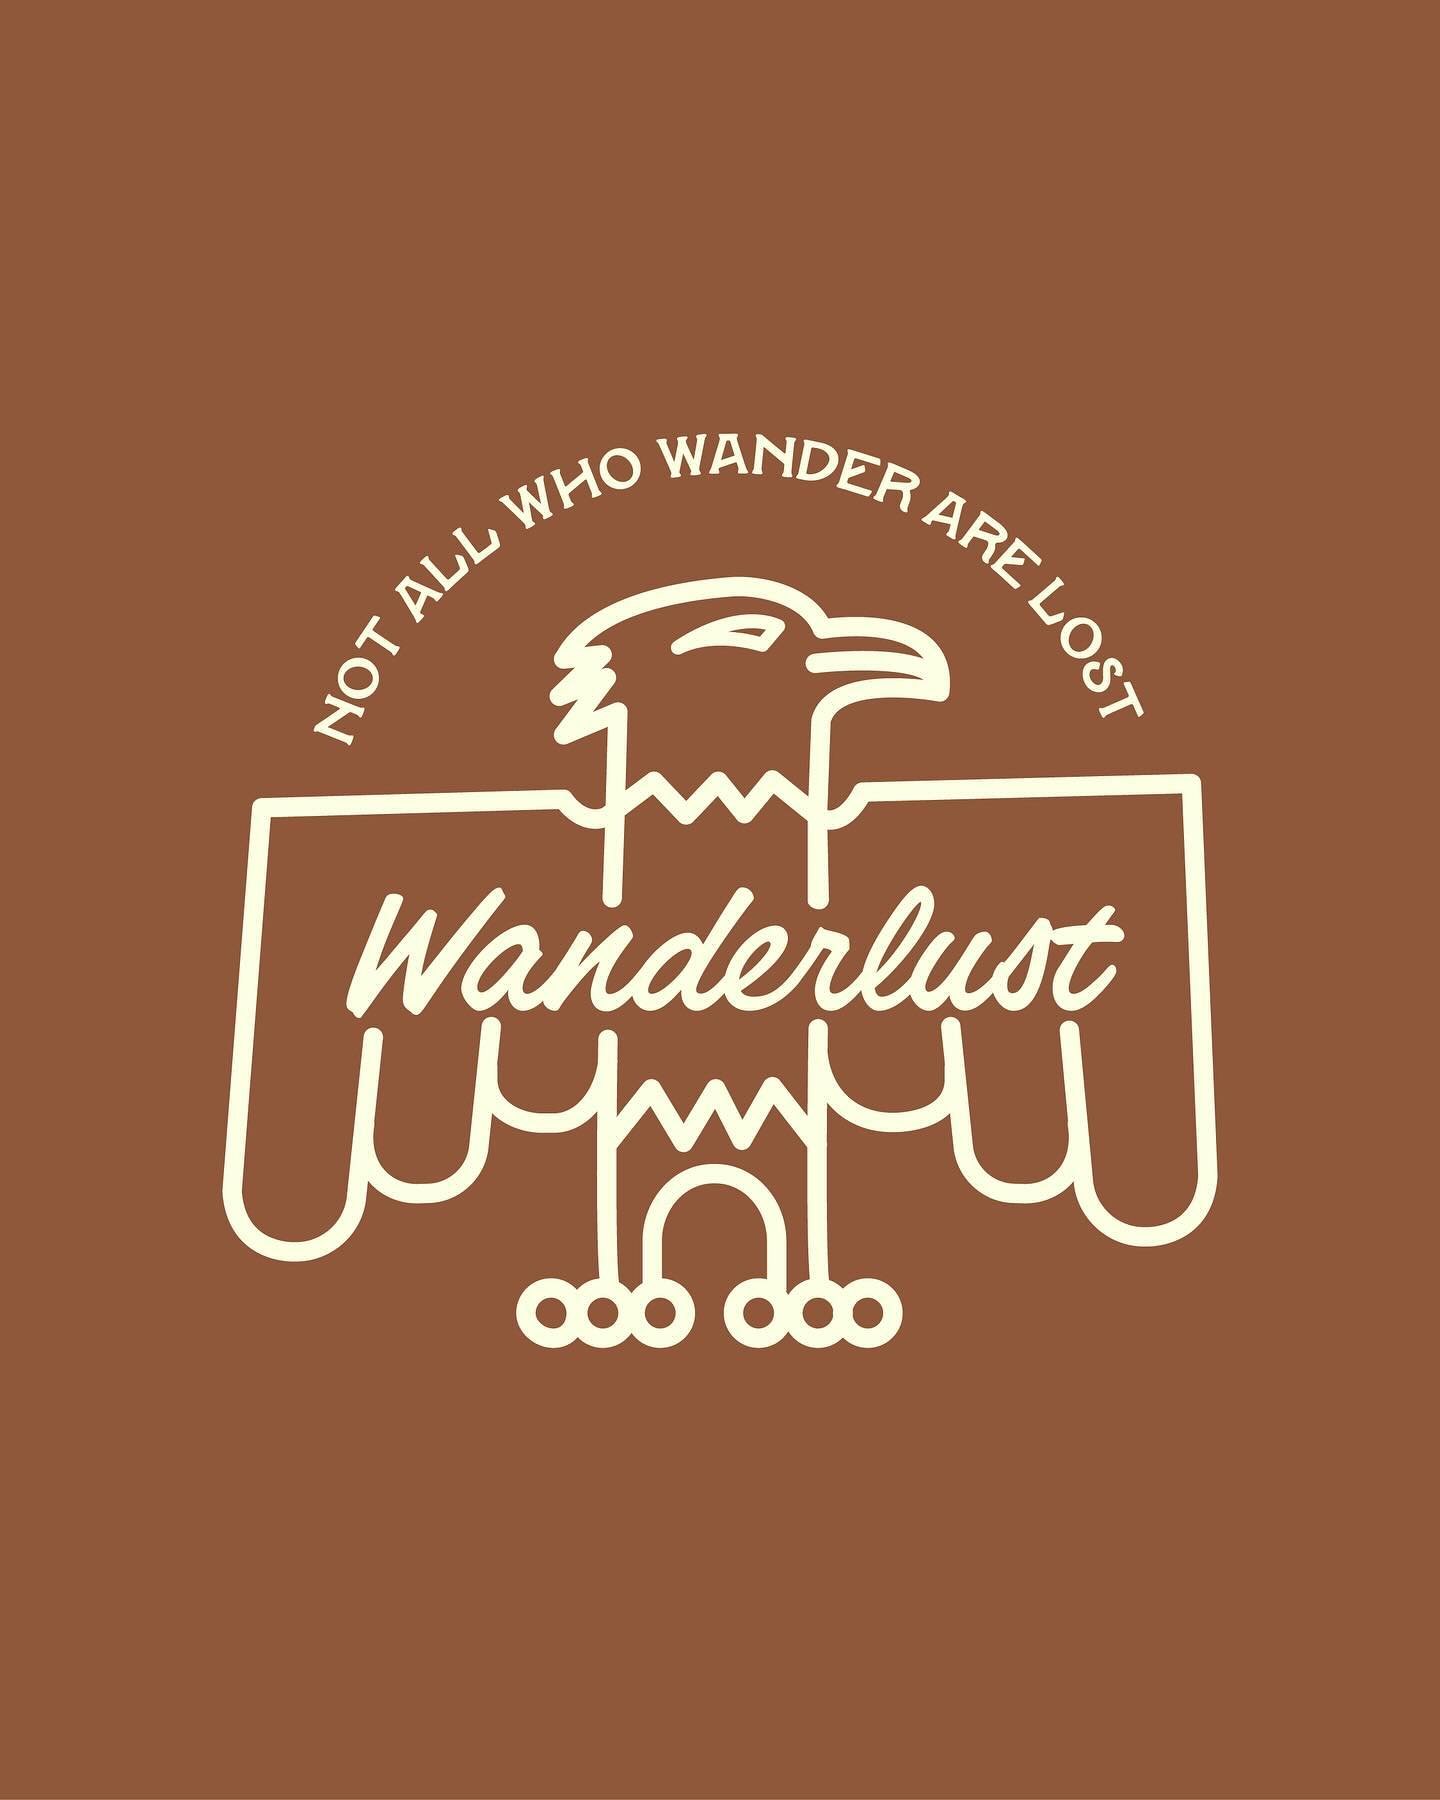 Thunderbird Thursday is a thing, right?! 😝. Inspired by the fact that I am slightly obsessed with vintage Navajo silver right now.  This design will also soon be available on my hats! 🤎

#thunderbird #wanderlust